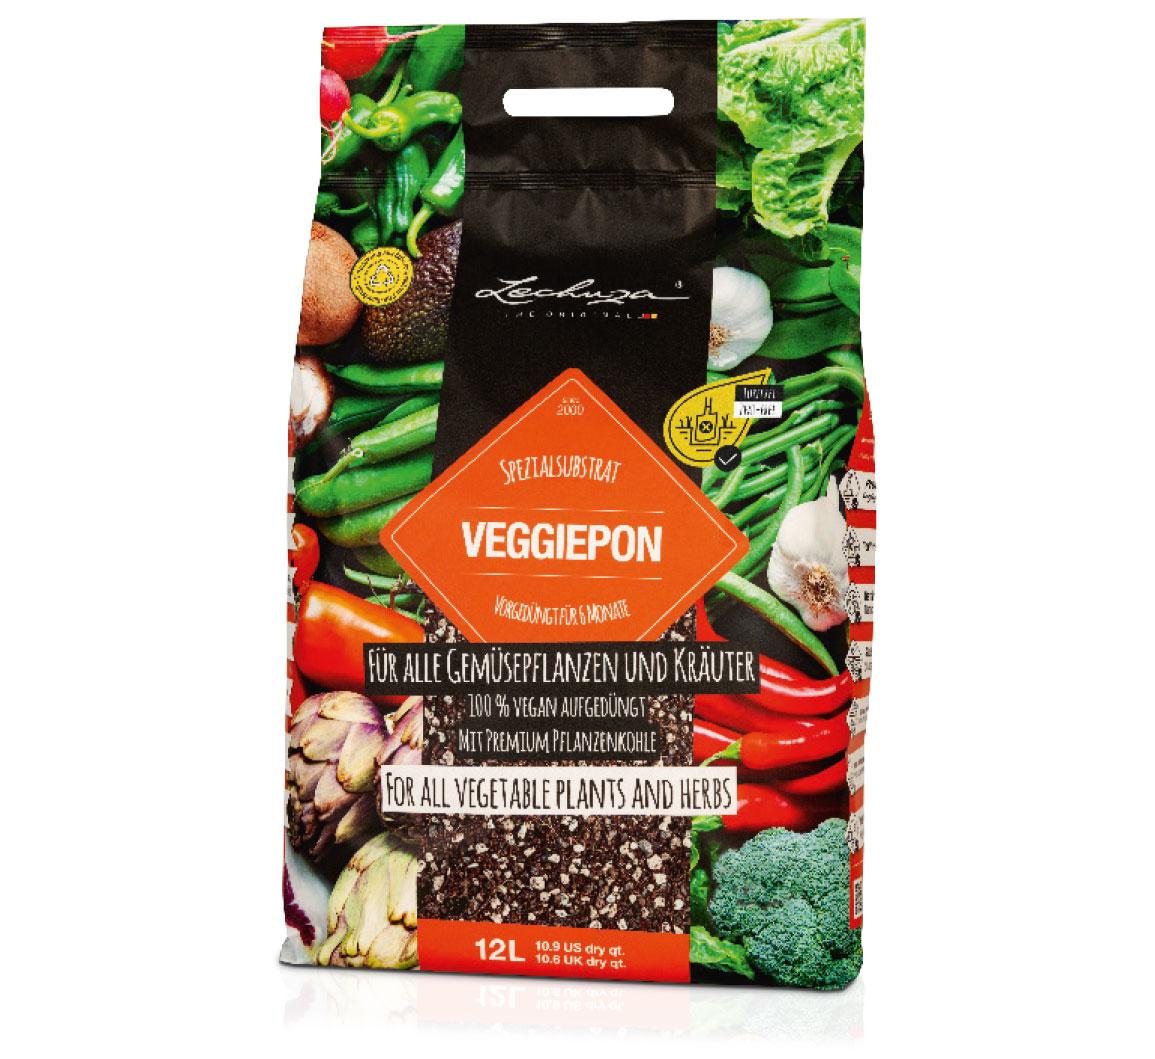 VEGGIEPON: For all vegetable plants and herbs